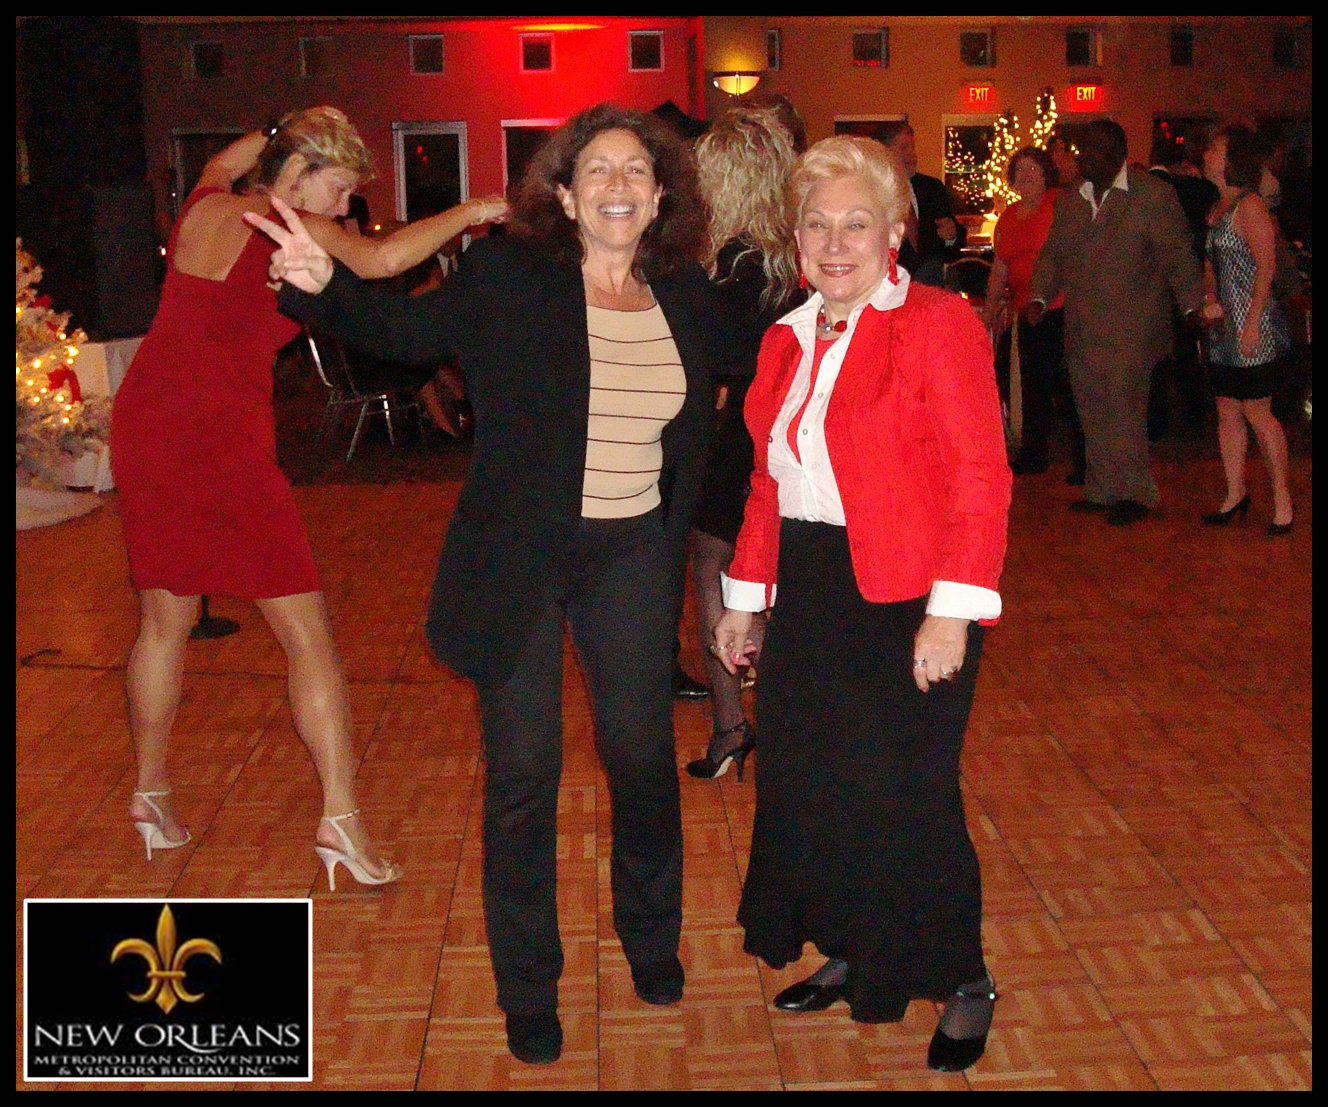 Daena Smoller and the Countess Bonnie Broel (House of Broel owner) at a New Orleans CVB X-Mas Party.